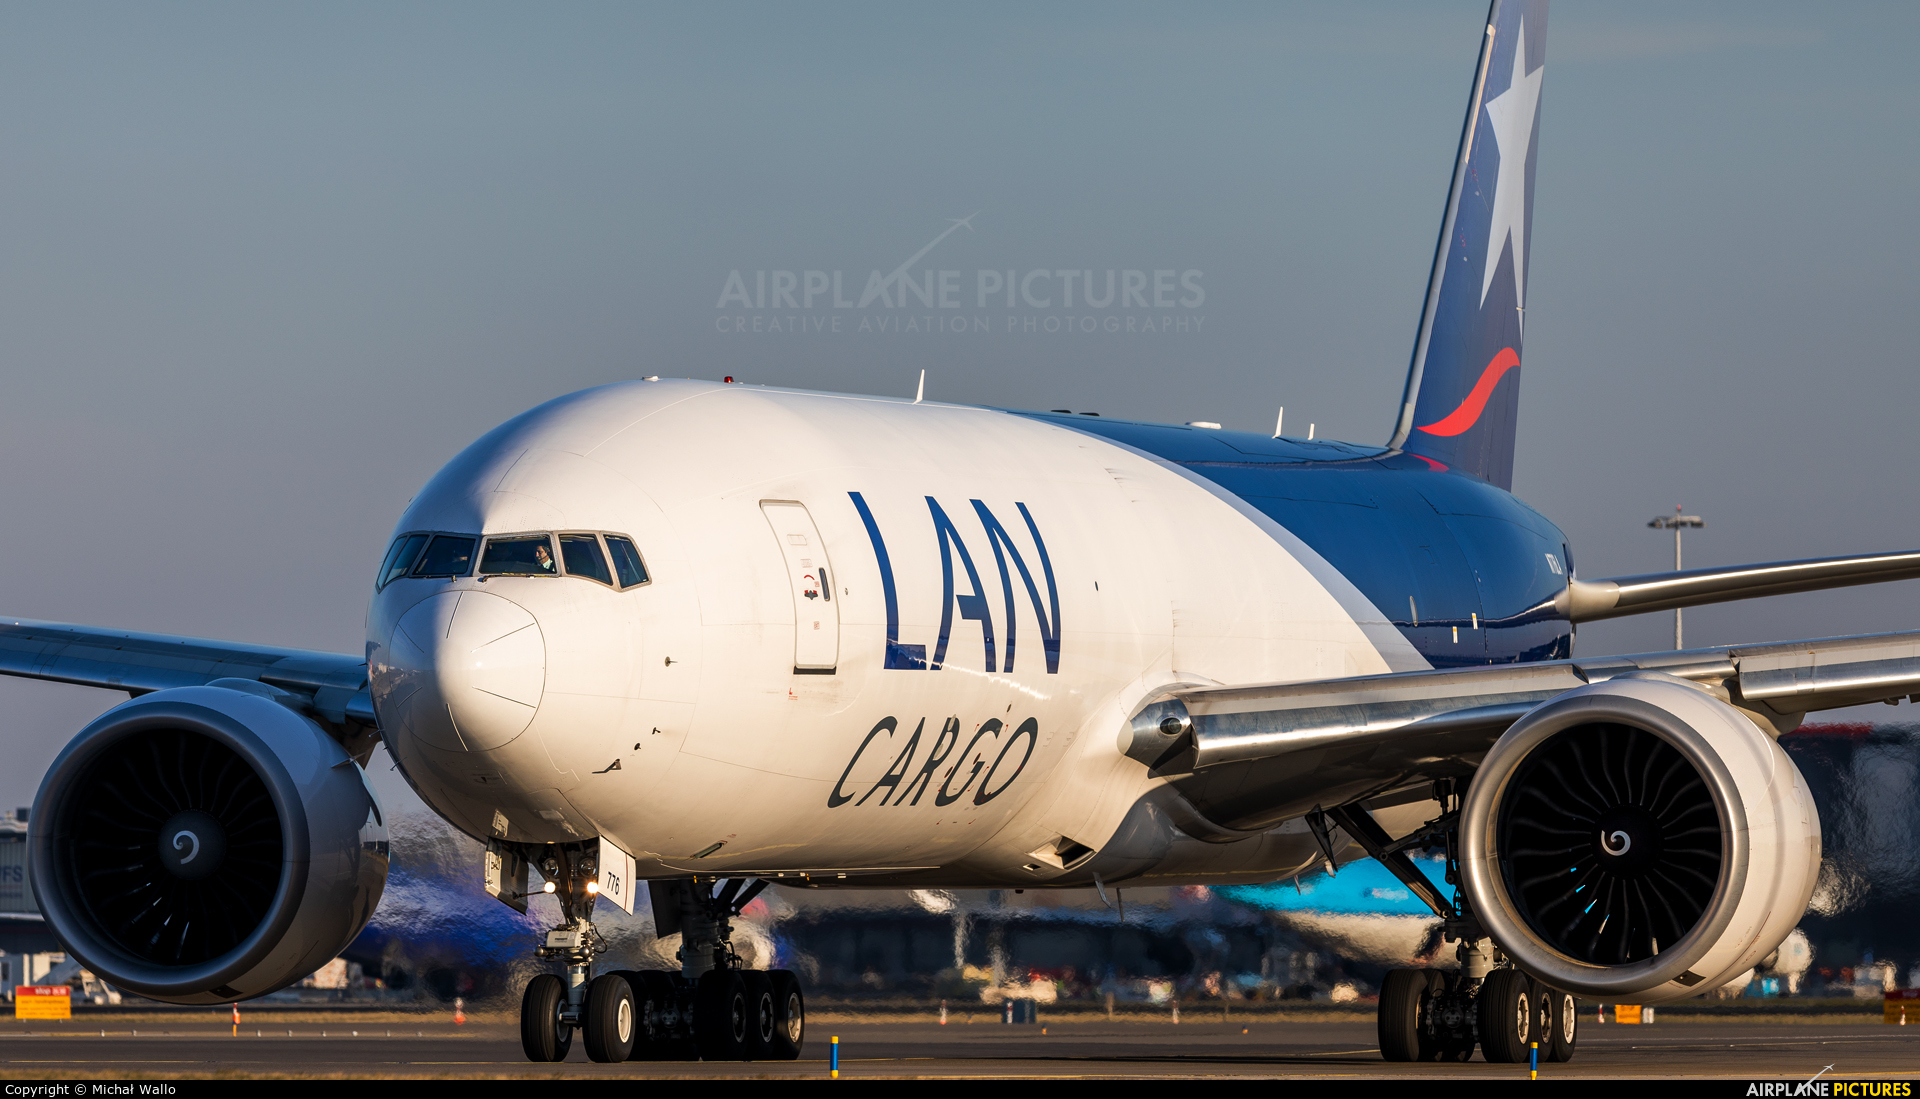 LAN Cargo Colombia N776LA aircraft at Amsterdam - Schiphol